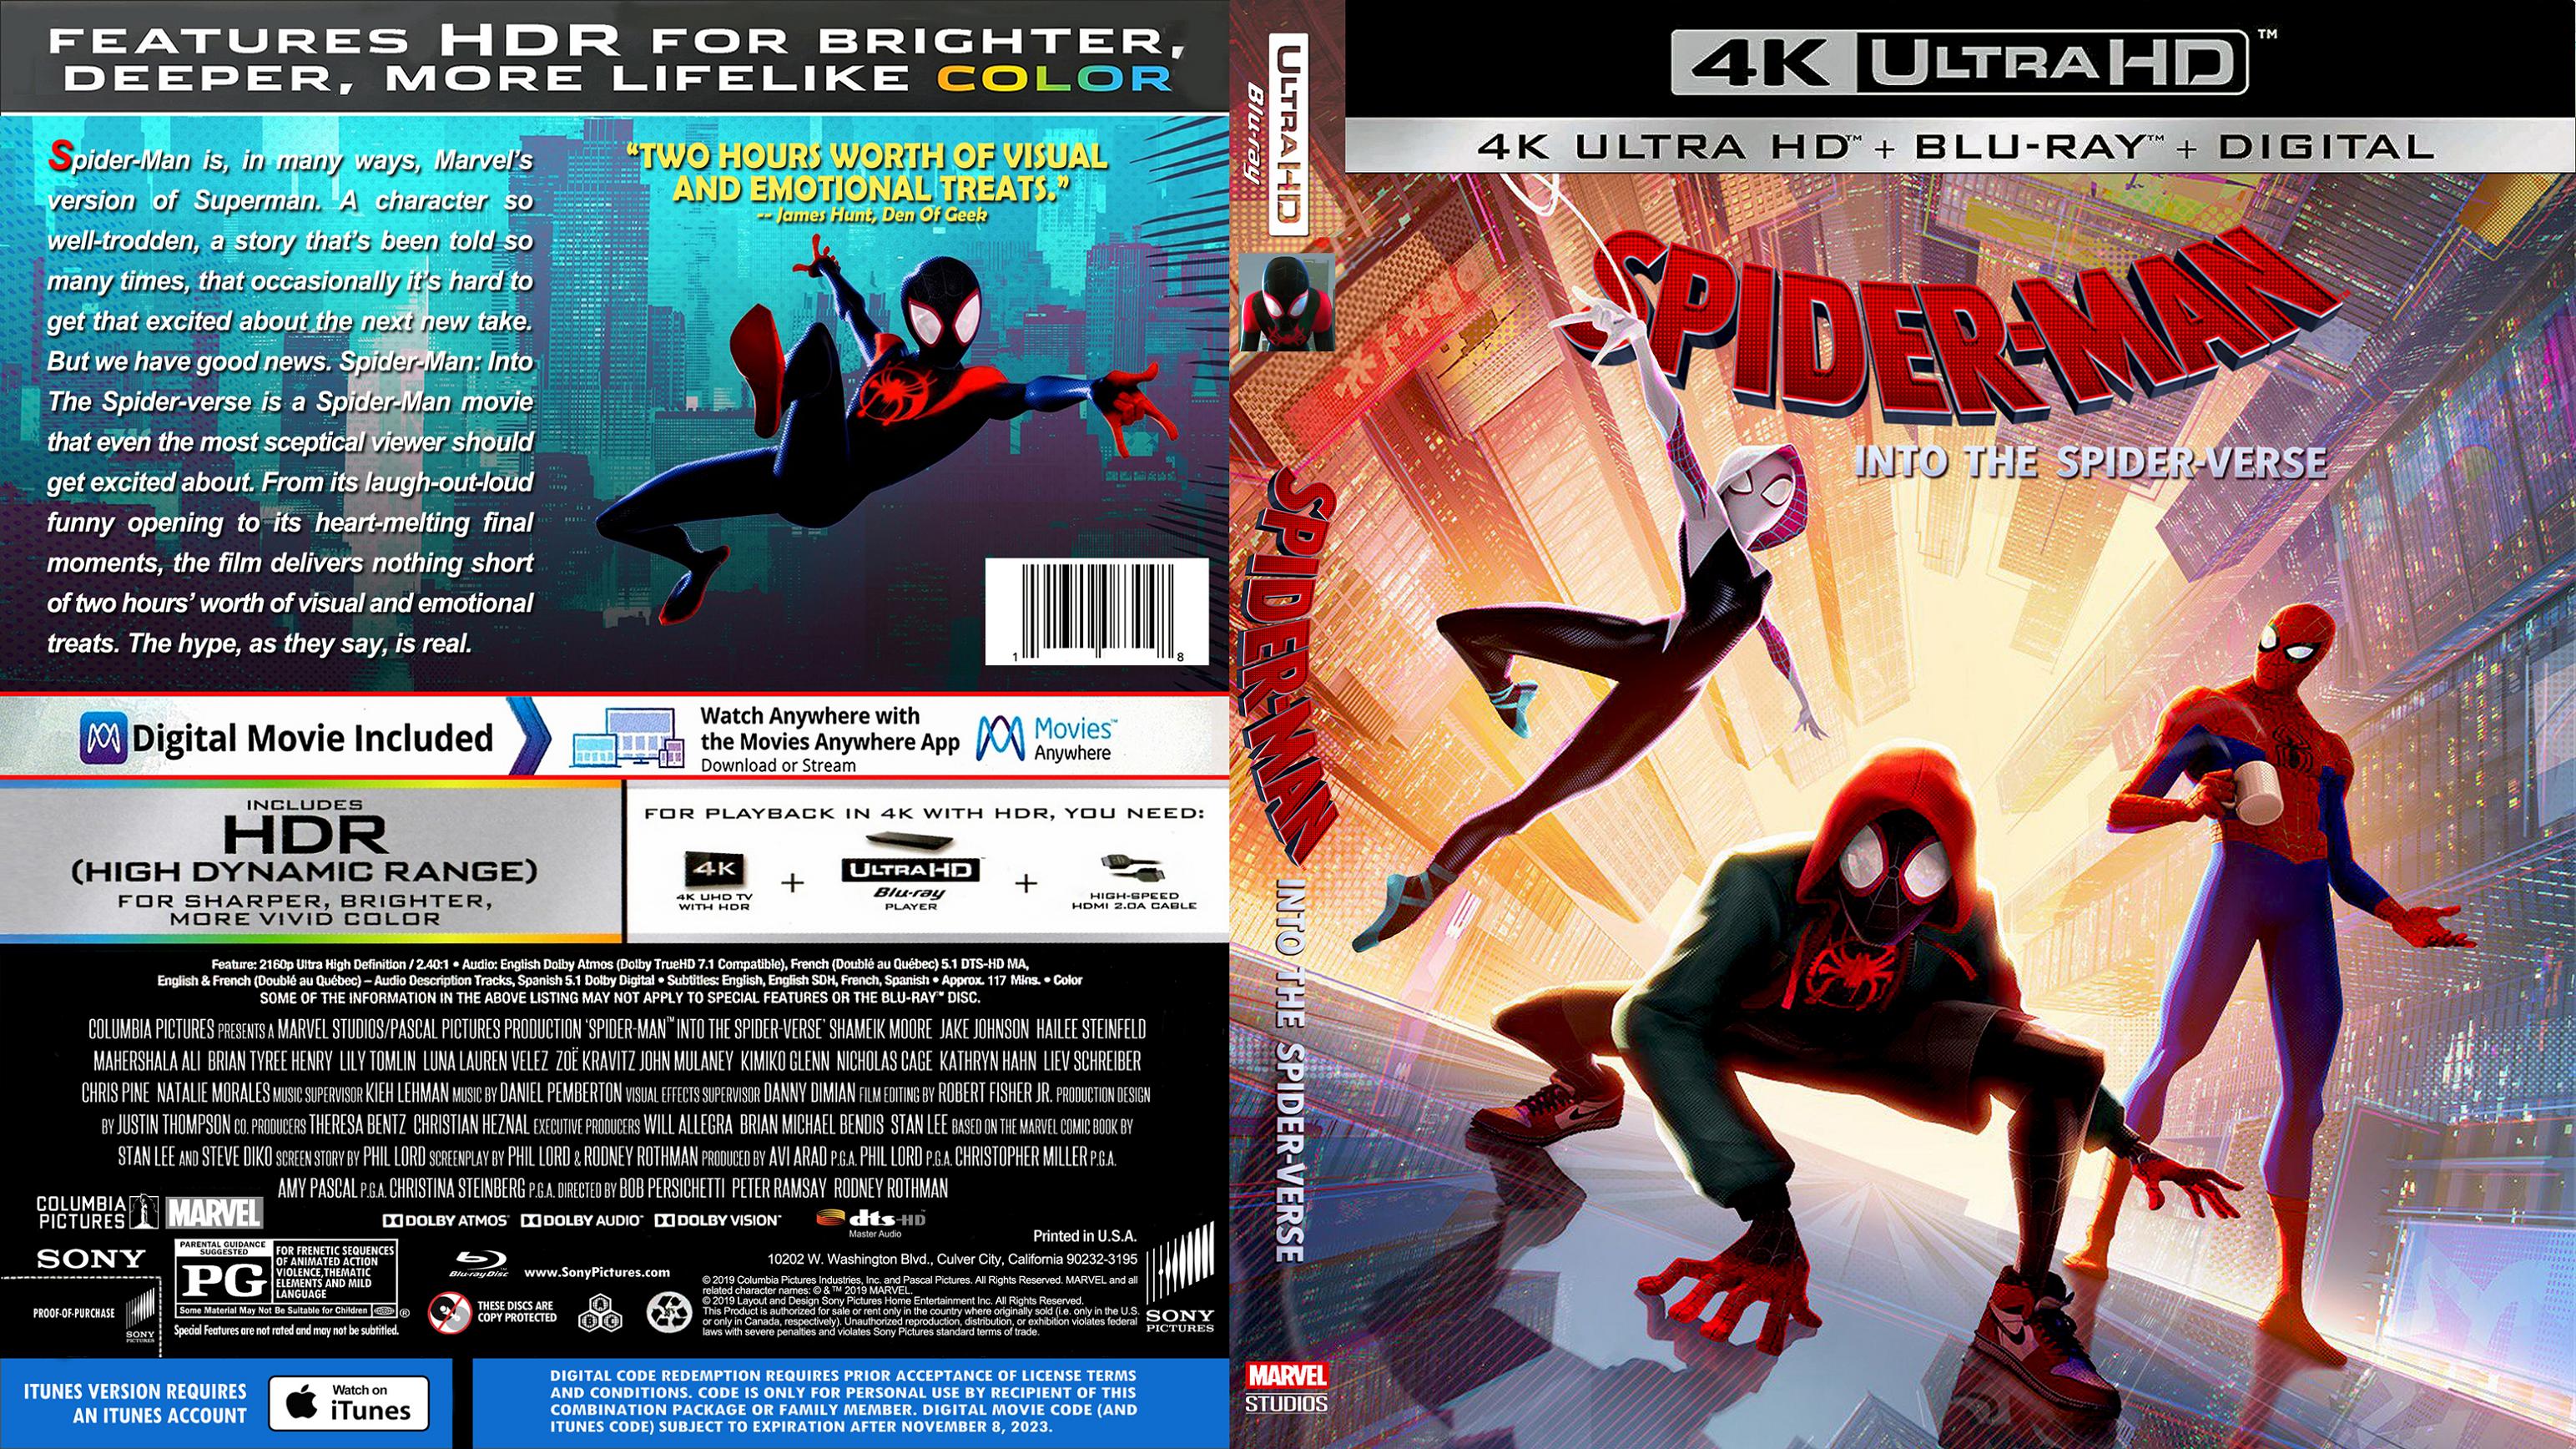 Spiderman-Into_The_Spider-Verse_4K - front.